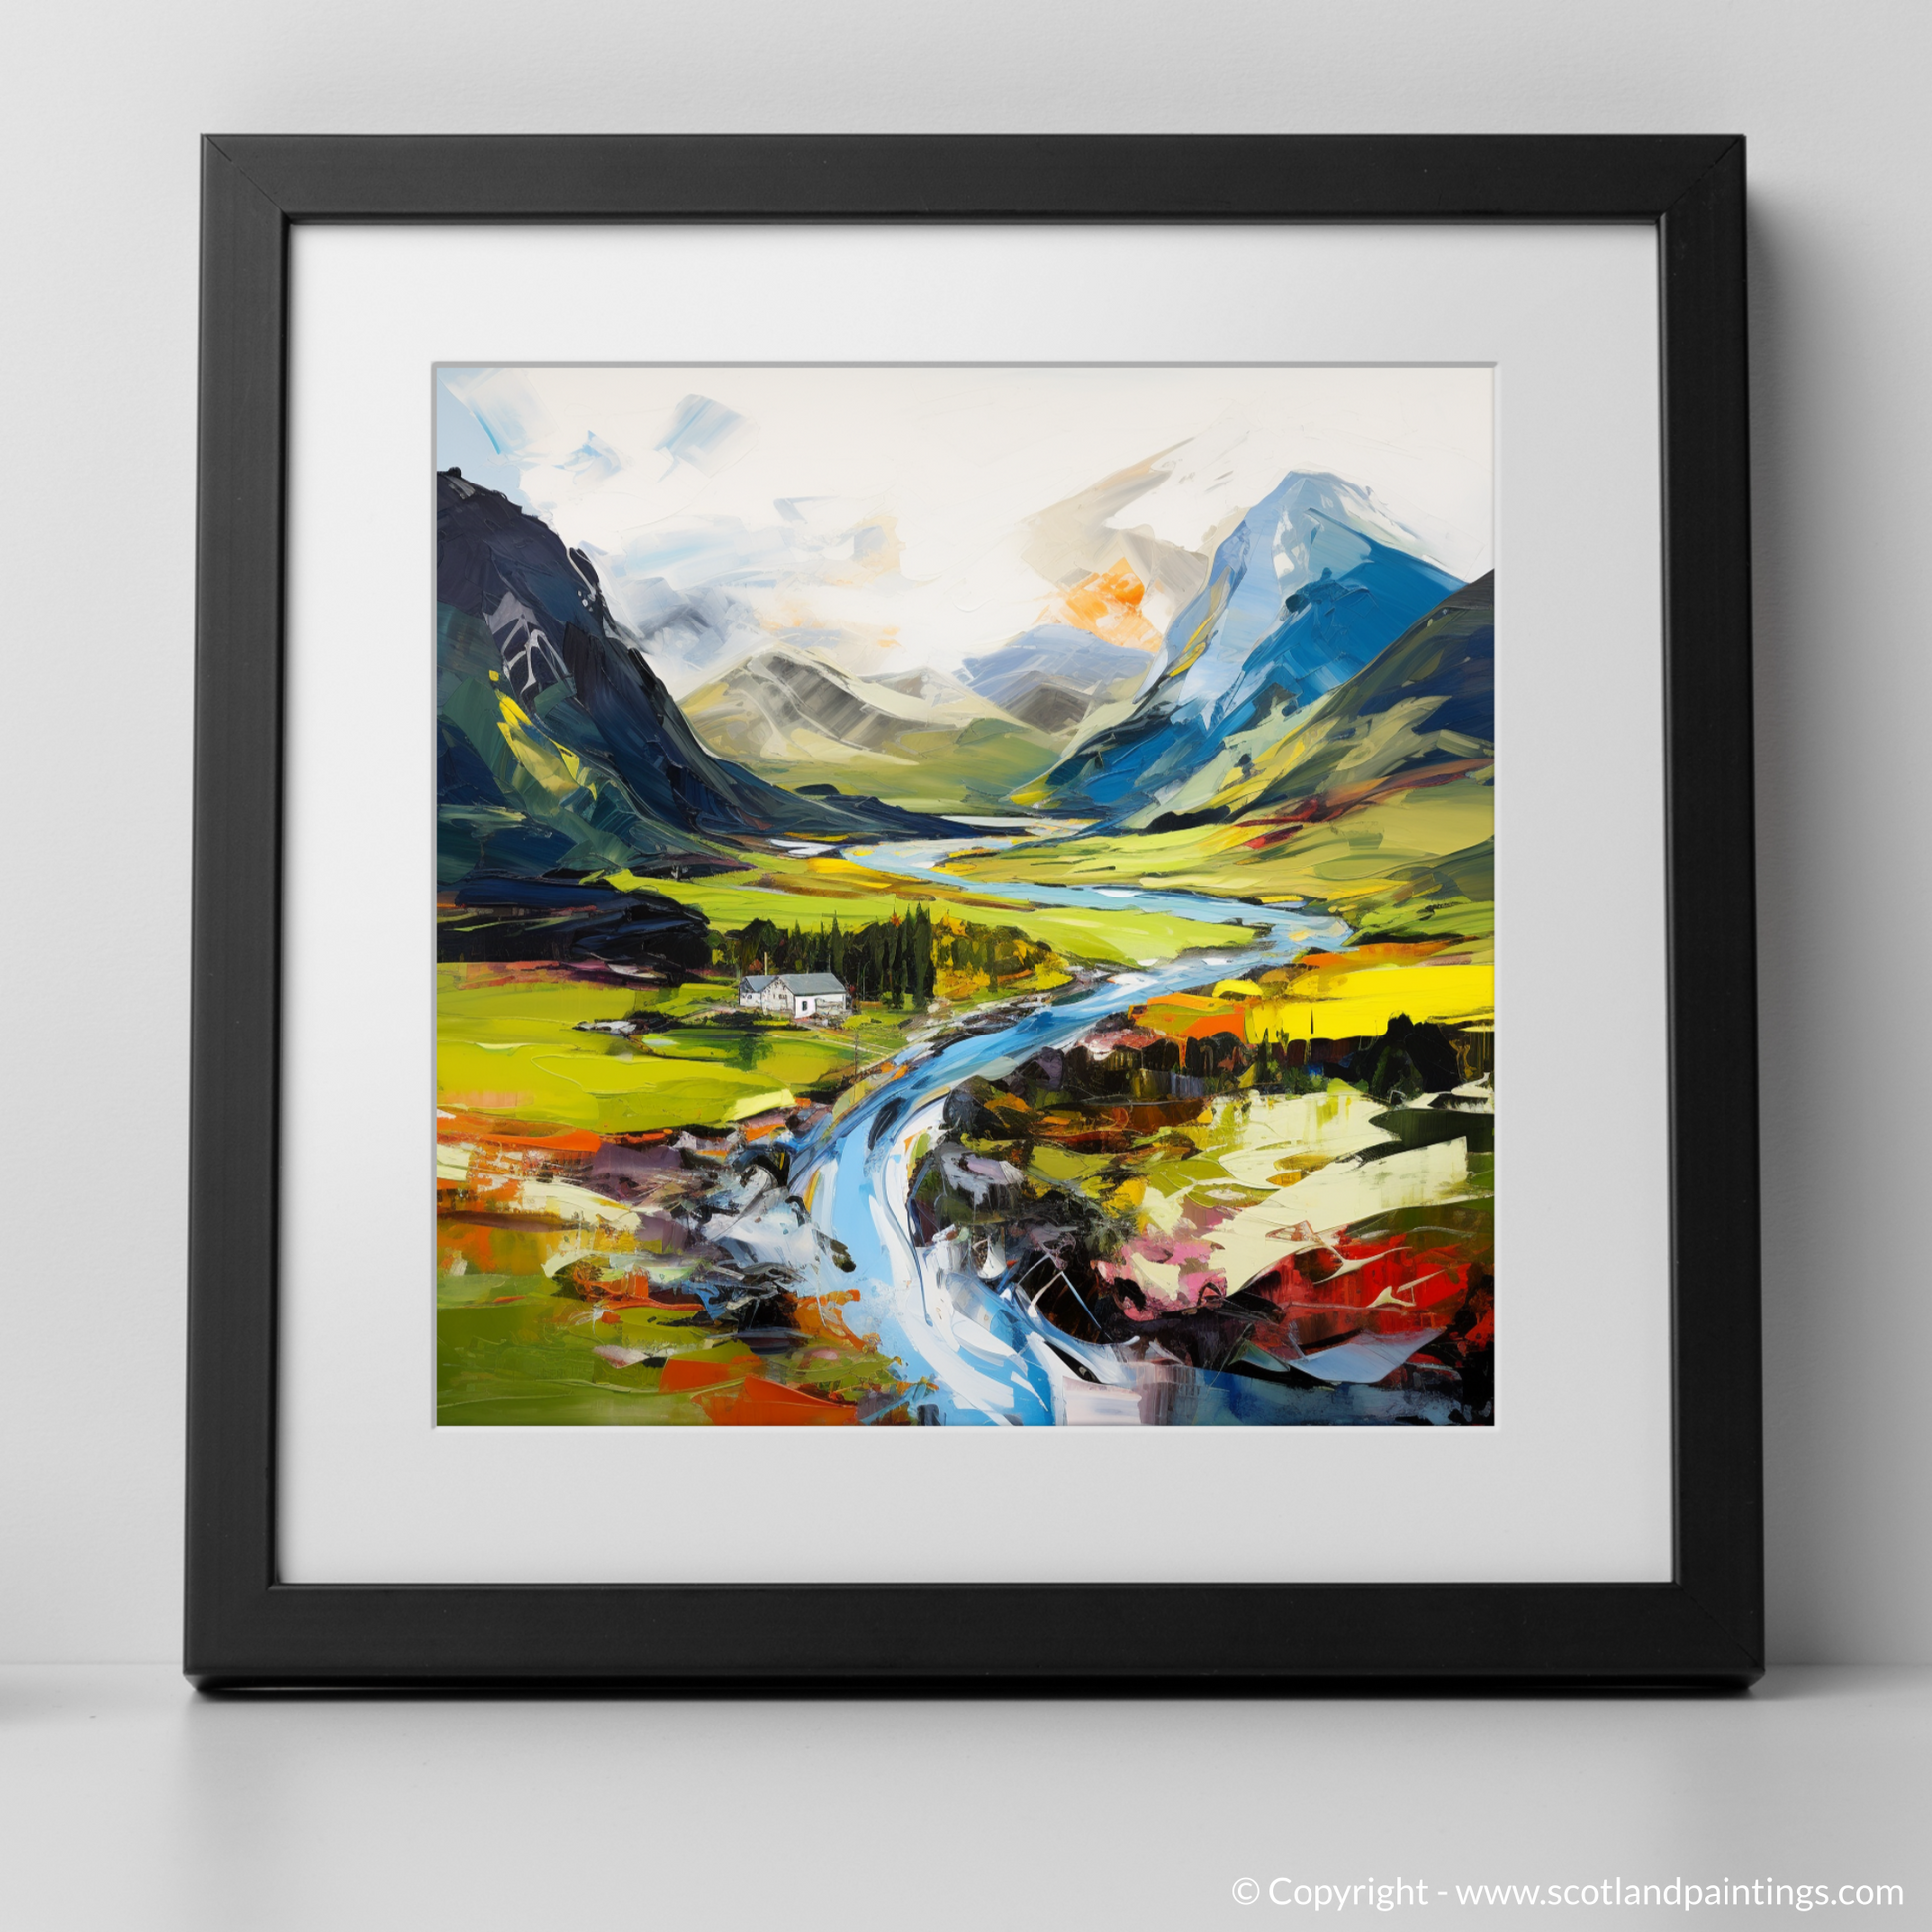 Art Print of Glencoe, Argyll and Bute with a black frame